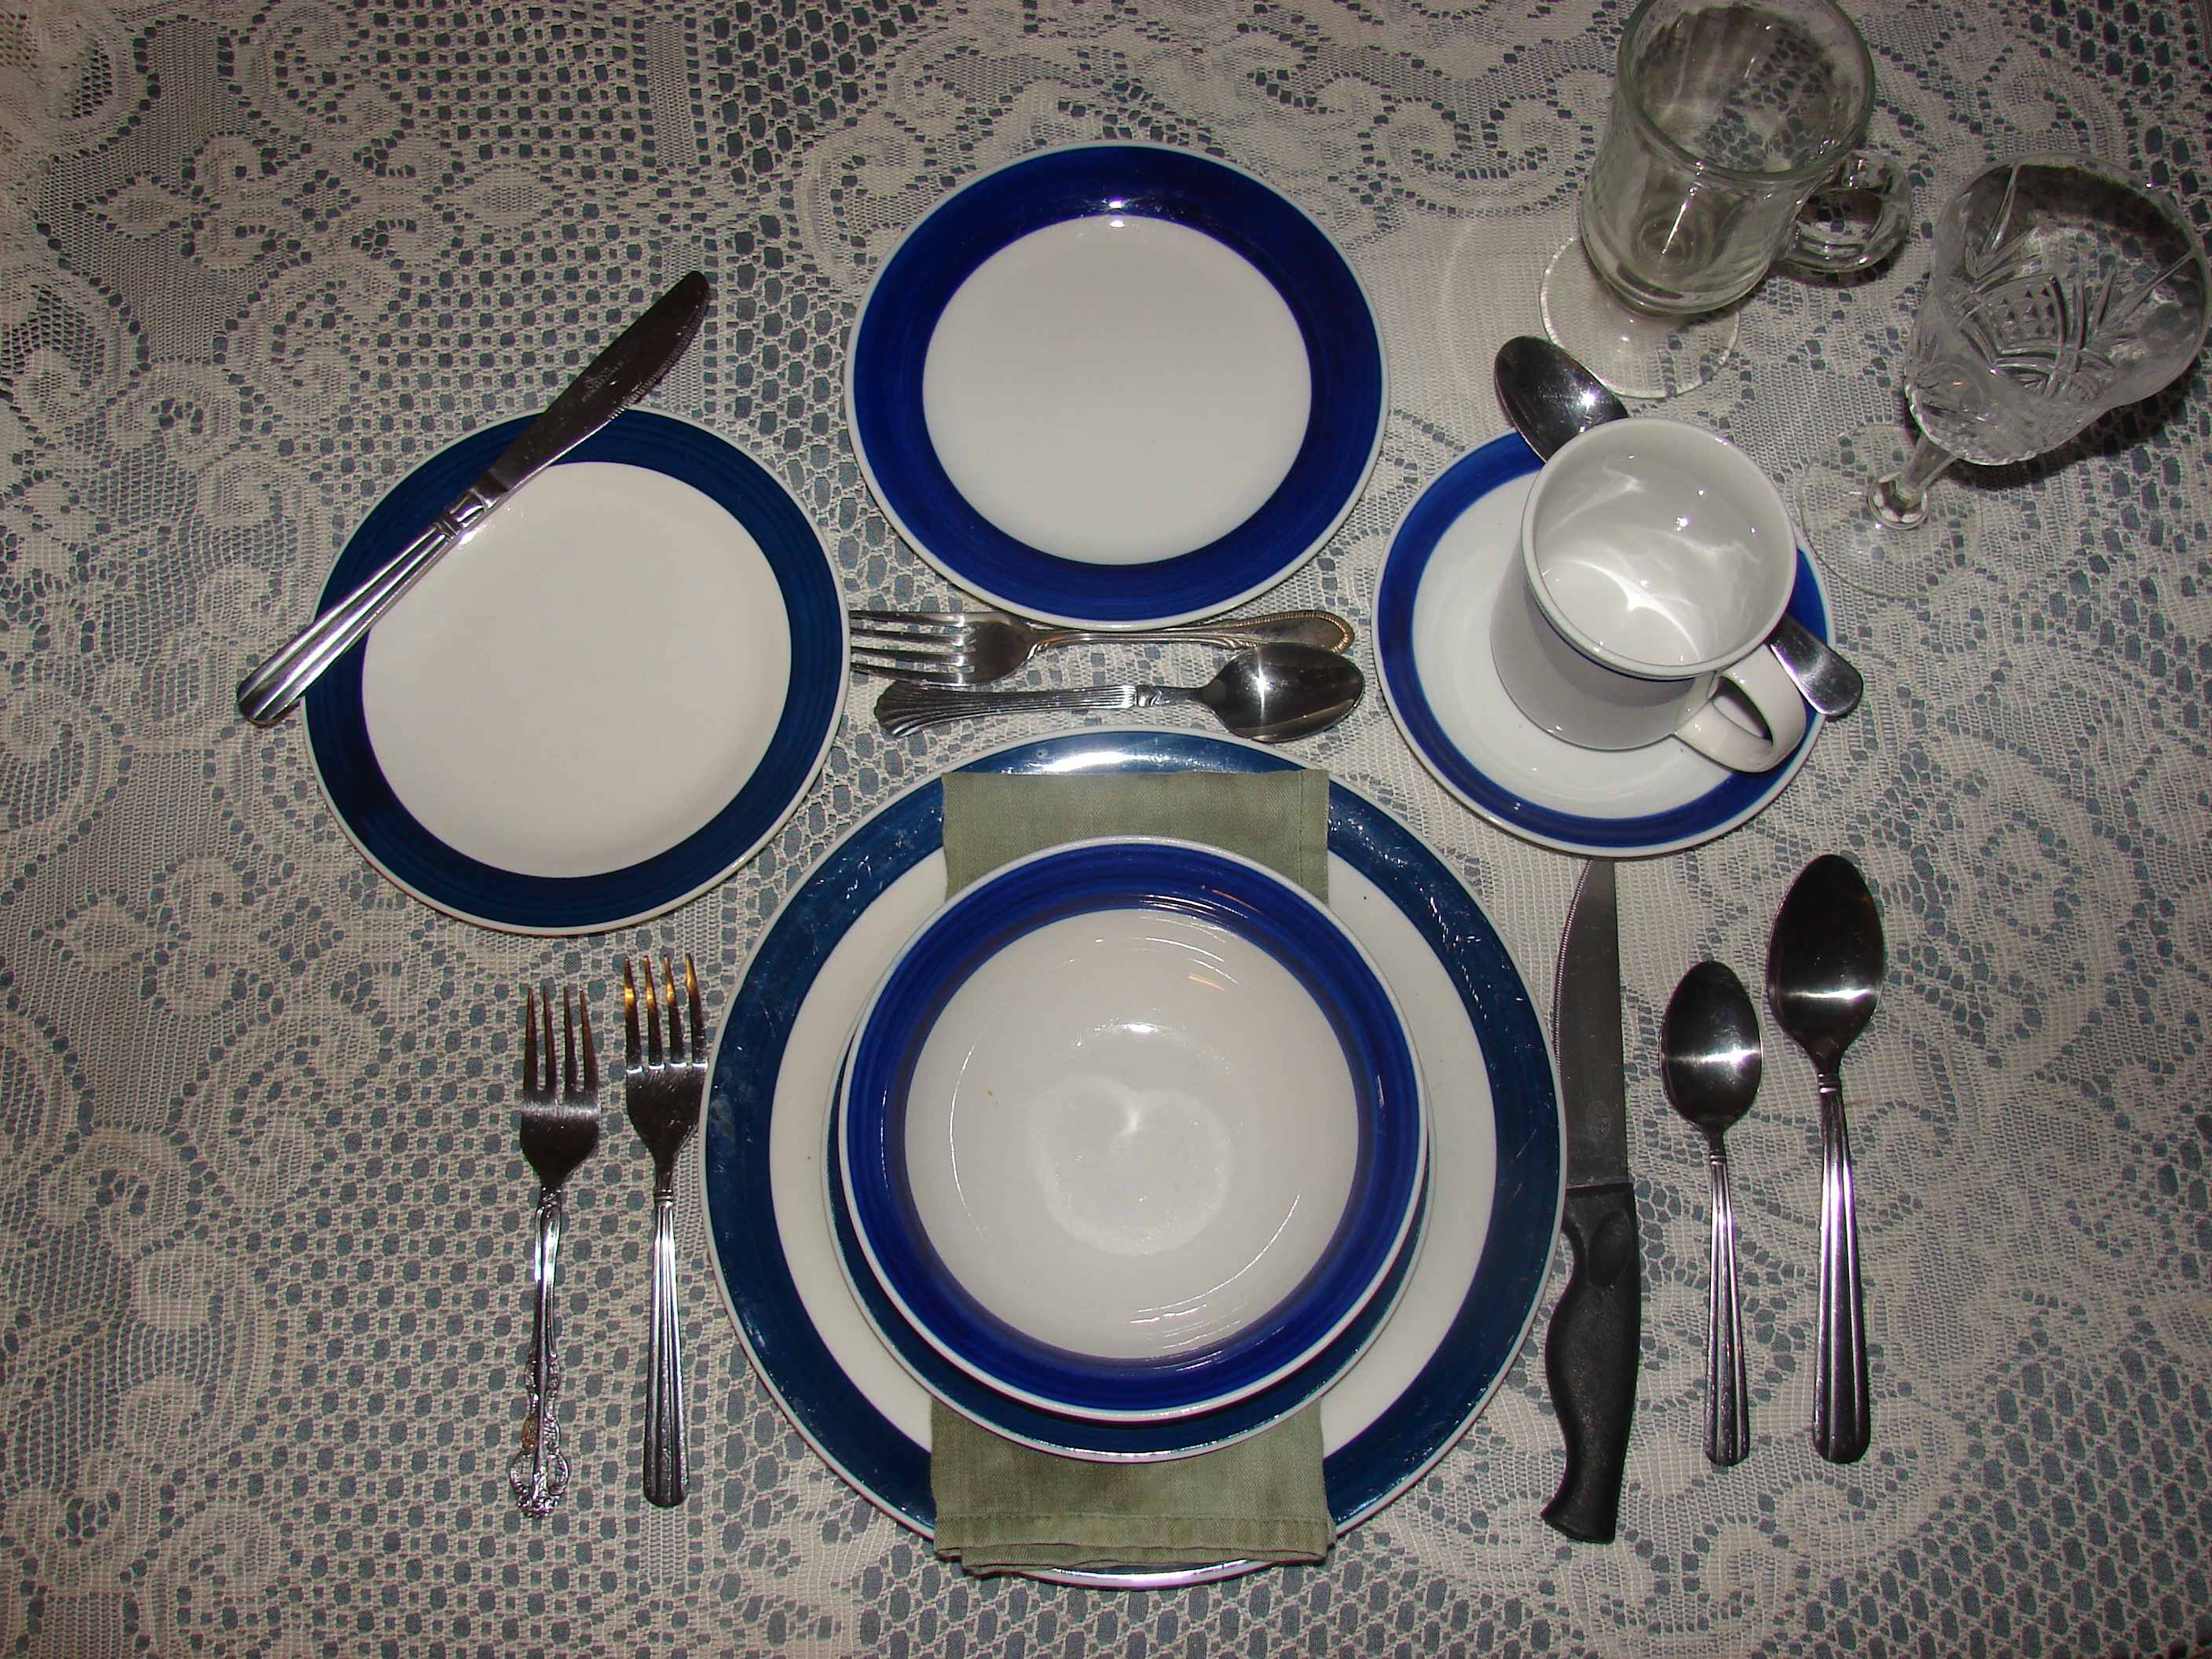 A formal table setting may include a lineup of utensils and glasses. (Photo courtesy of Jessalrene, Morguefile)